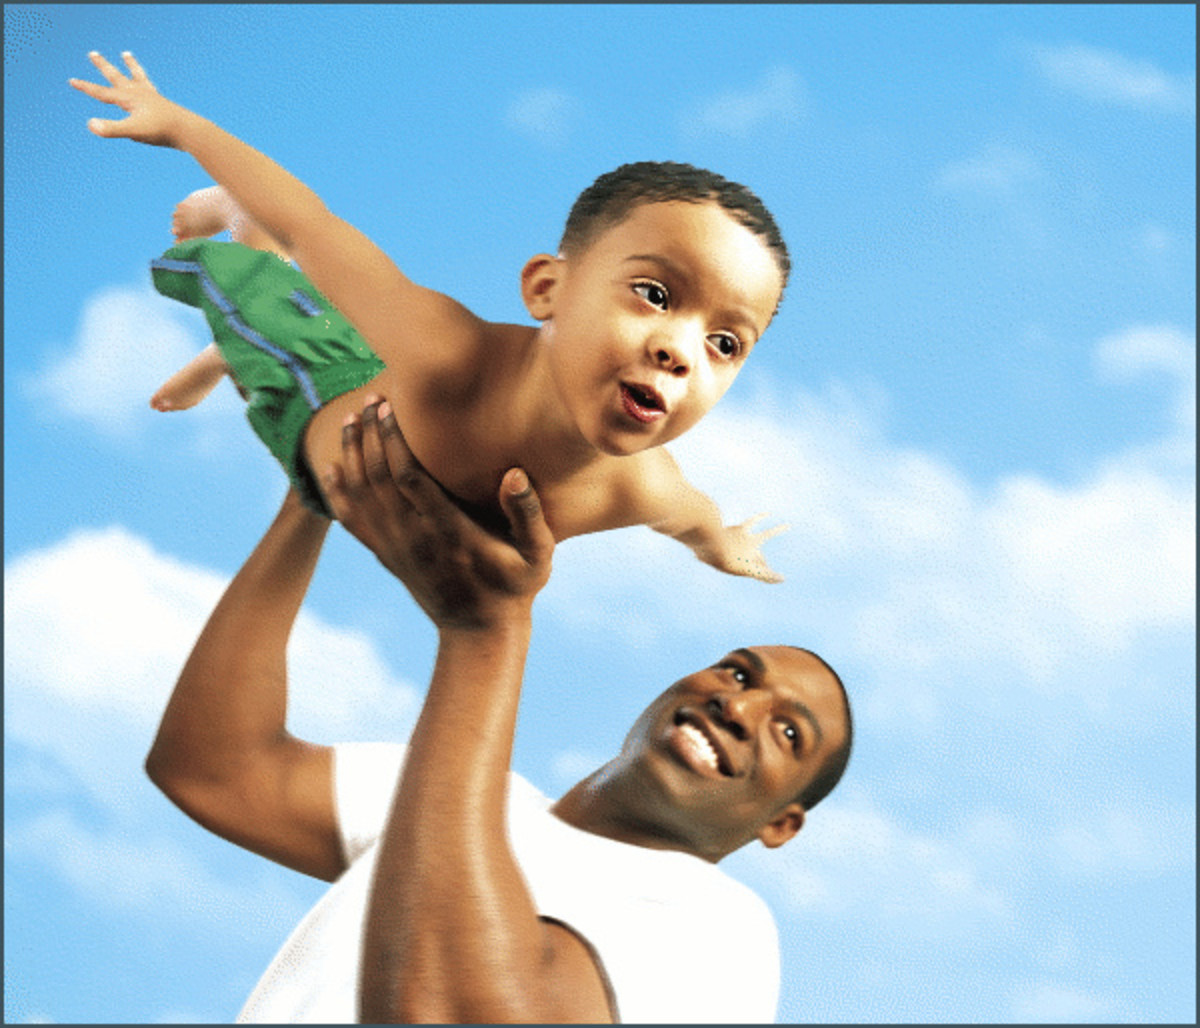 Good Parenting Advice : How to be a good Father to your Child? Image Courtesy : wpclipart.com